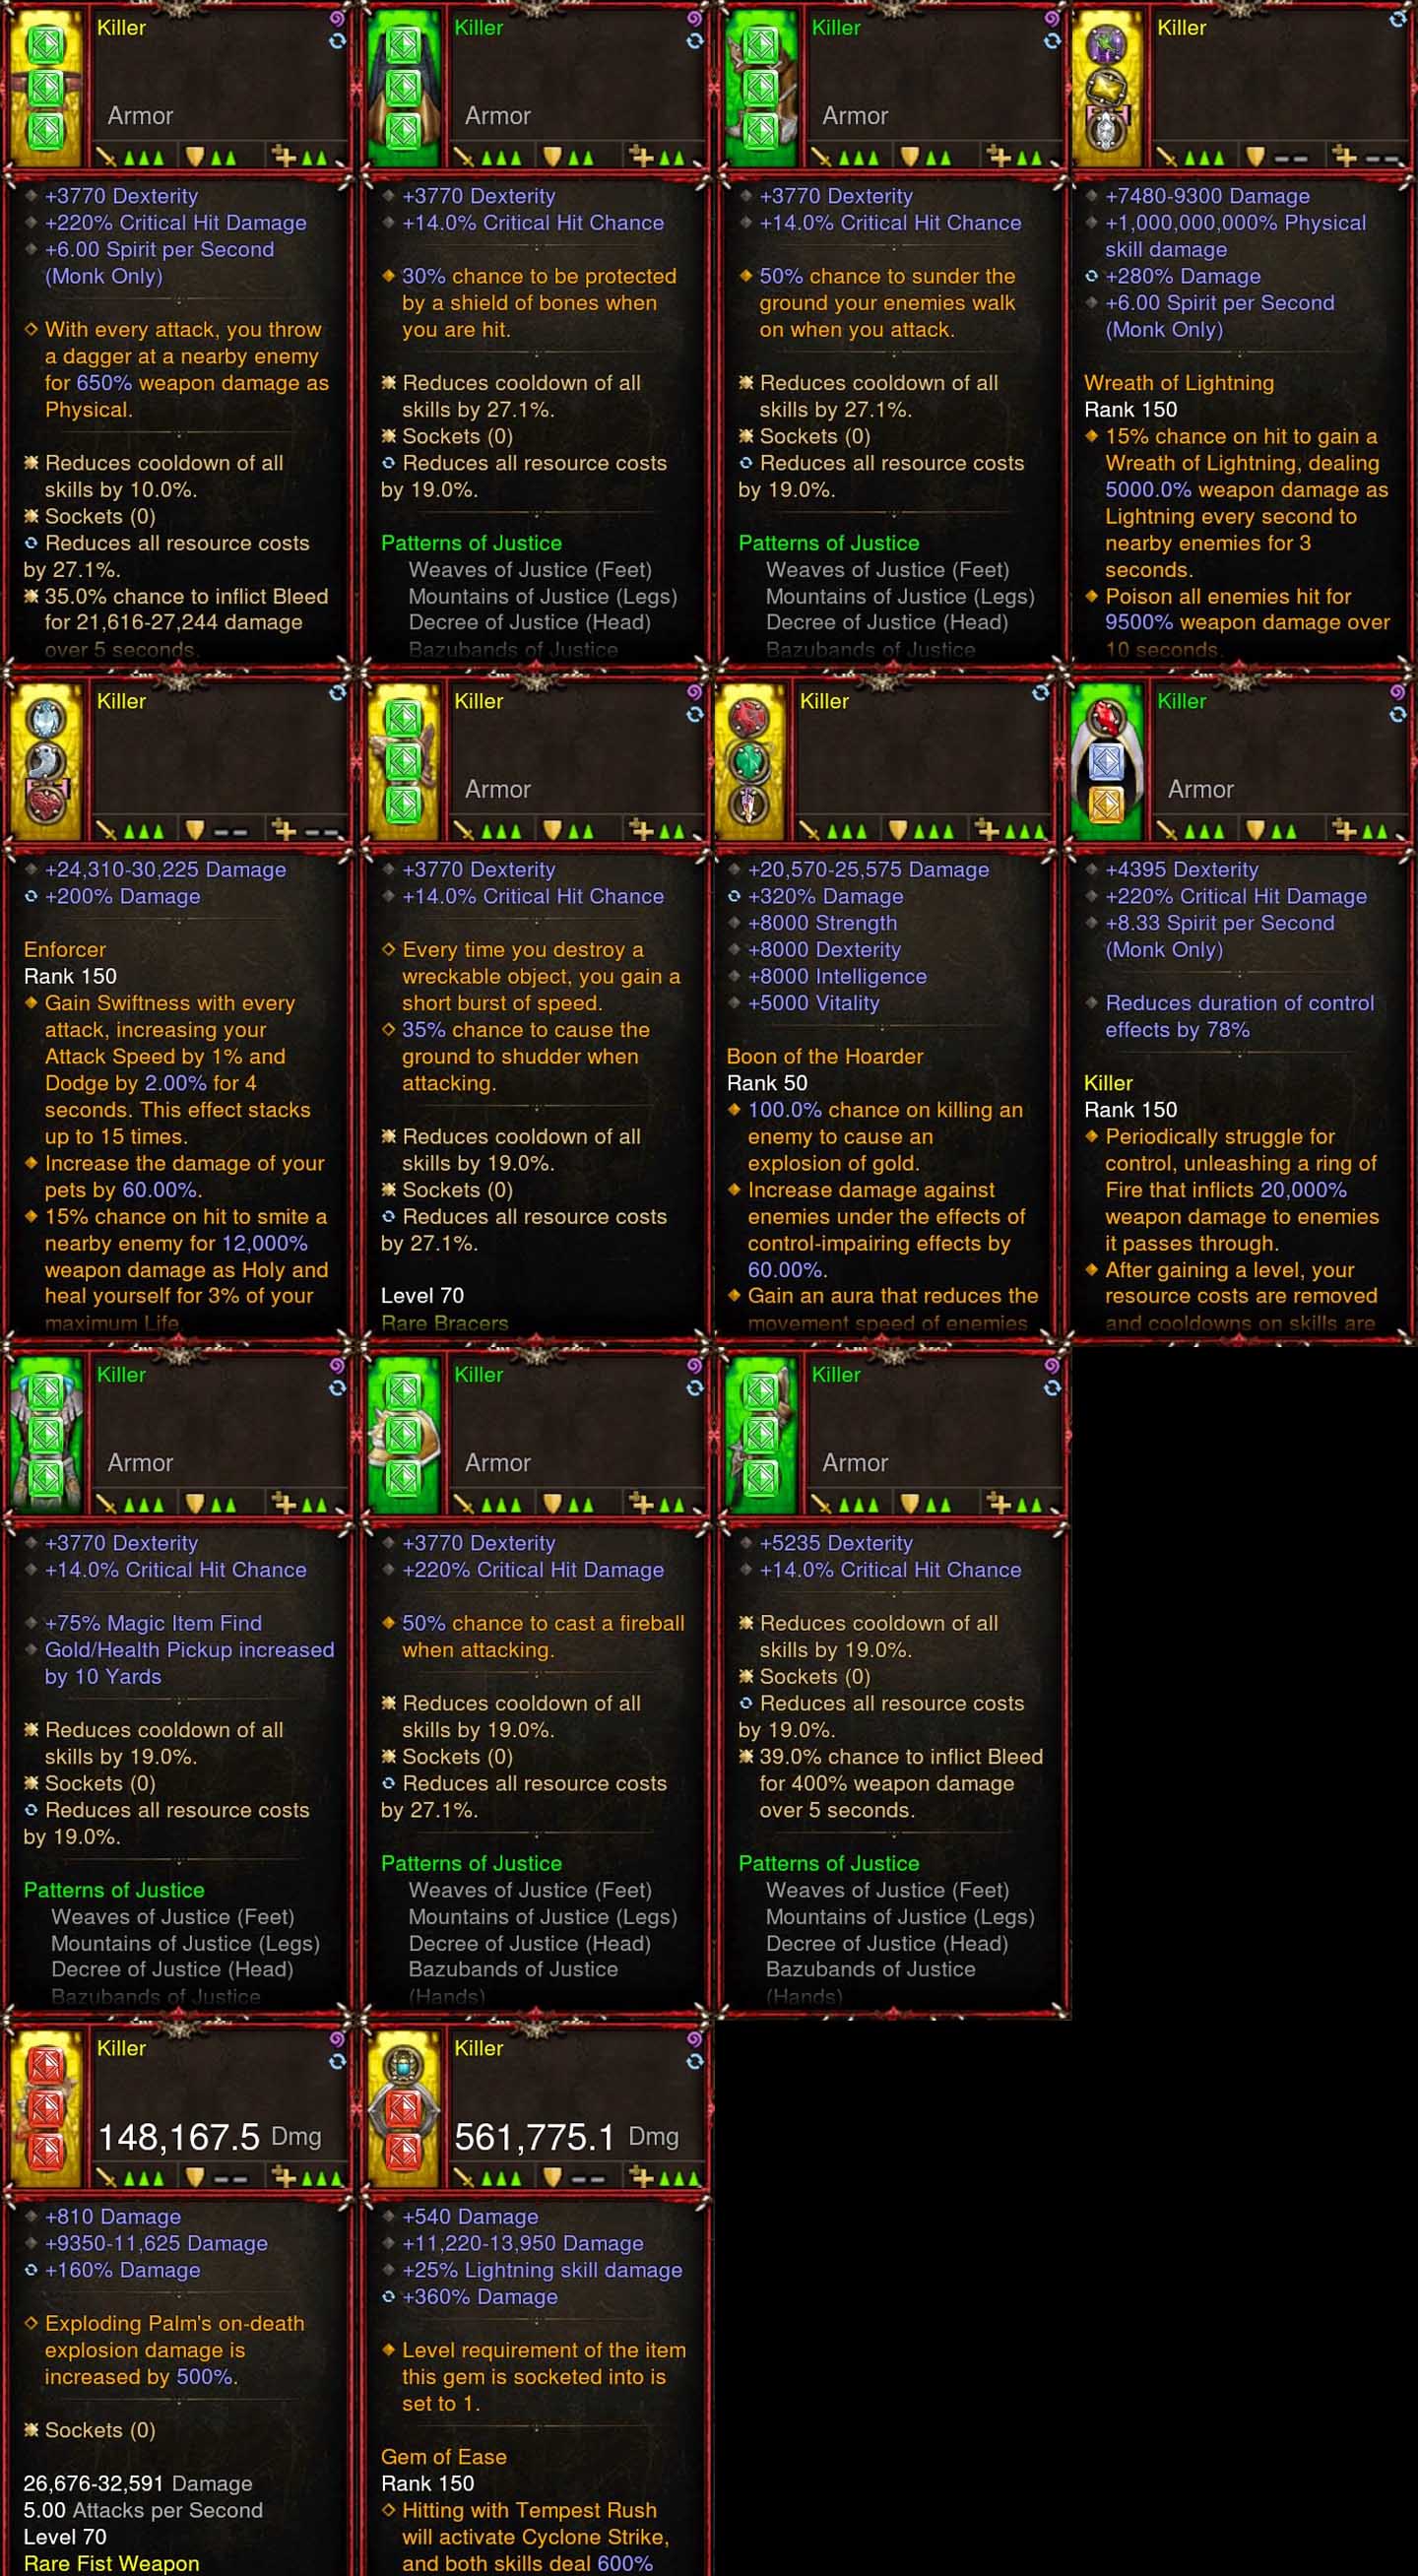 [Primal Ancient] [QUAD DPS] Immortality v5 Justice FAST Monk Set Killer Diablo 3 Mods ROS Seasonal and Non Seasonal Save Mod - Modded Items and Gear - Hacks - Cheats - Trainers for Playstation 4 - Playstation 5 - Nintendo Switch - Xbox One